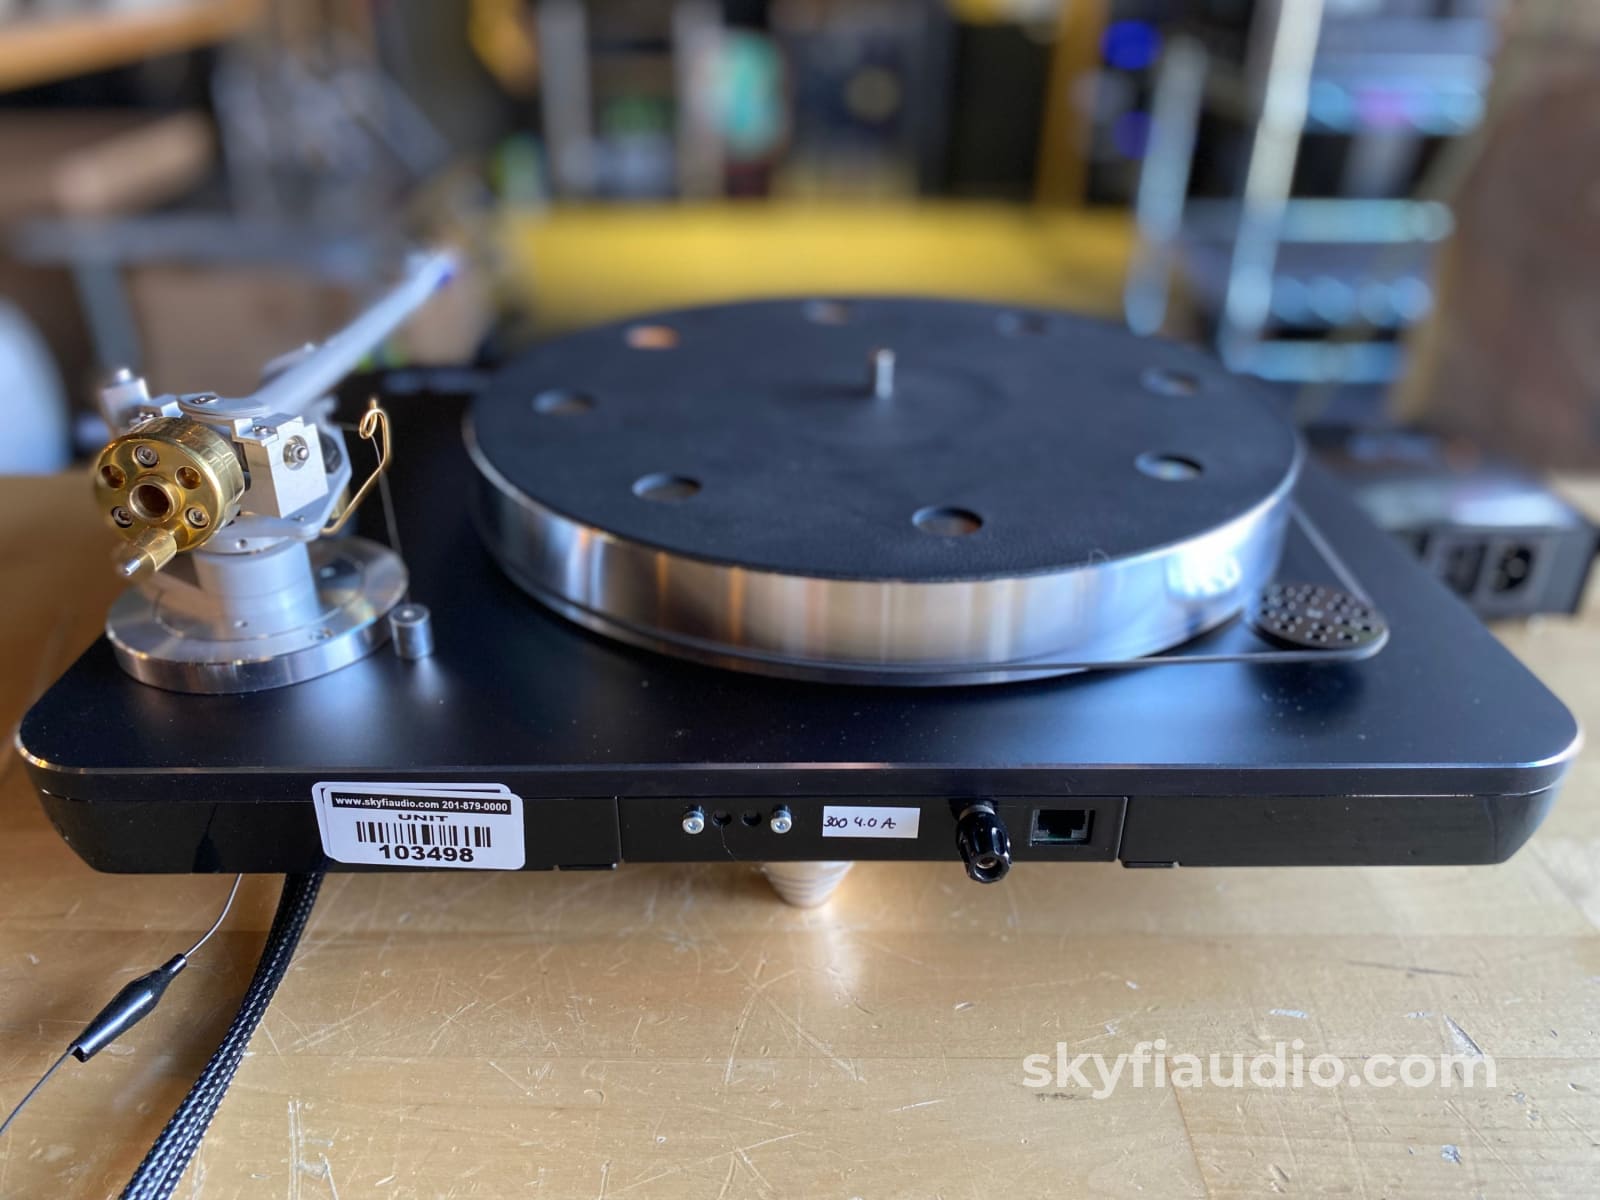 Acustic Signature Wow Xl Turntable With Upgraded Rega And Sumiko Songbird